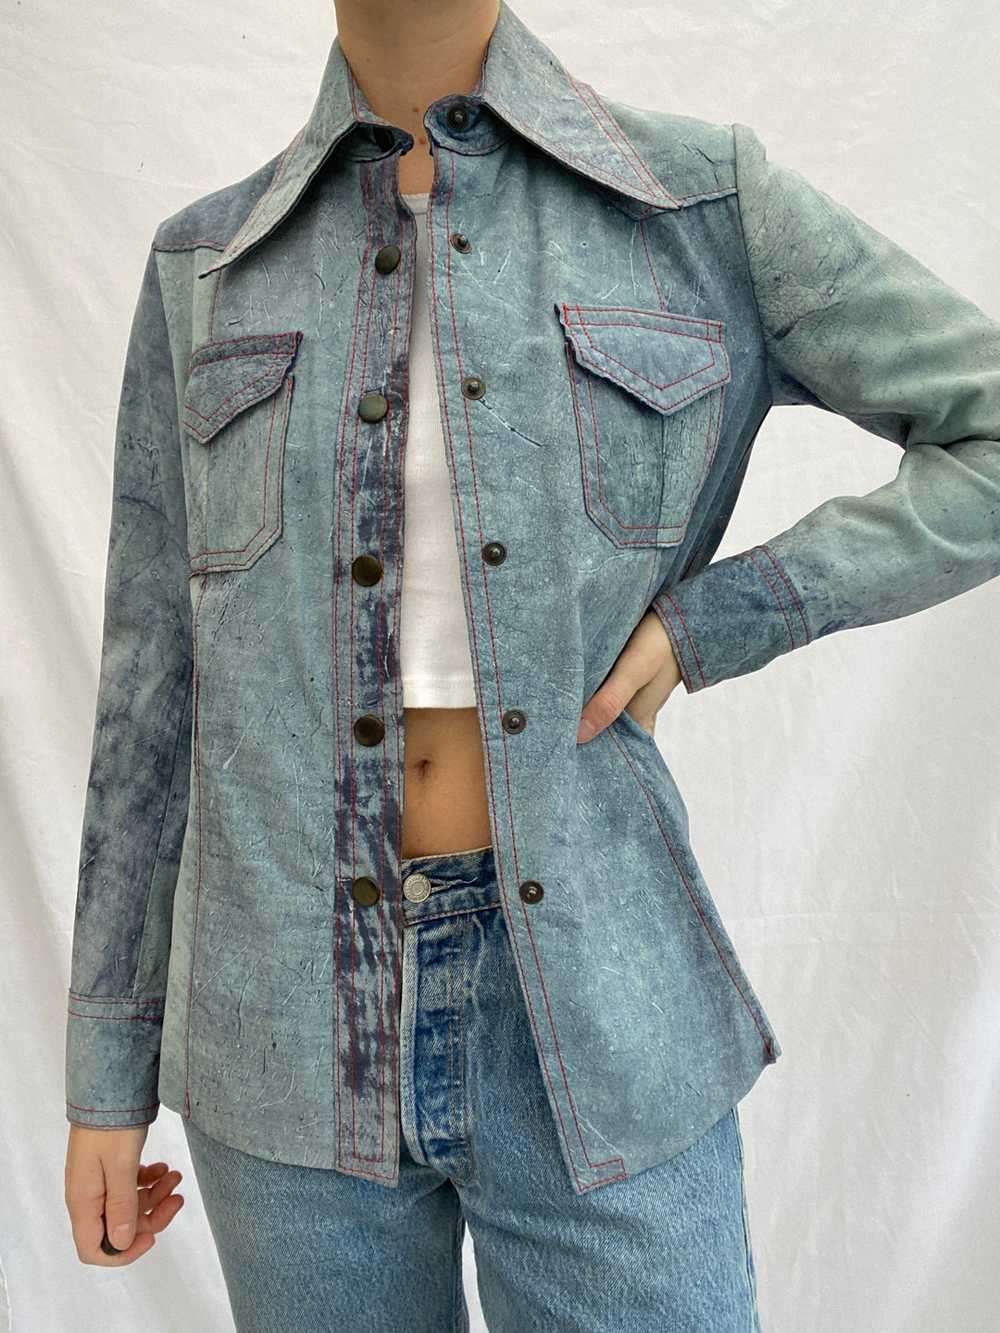 Baby Blue Suede Jacket Shirt with Red Stitching - image 2